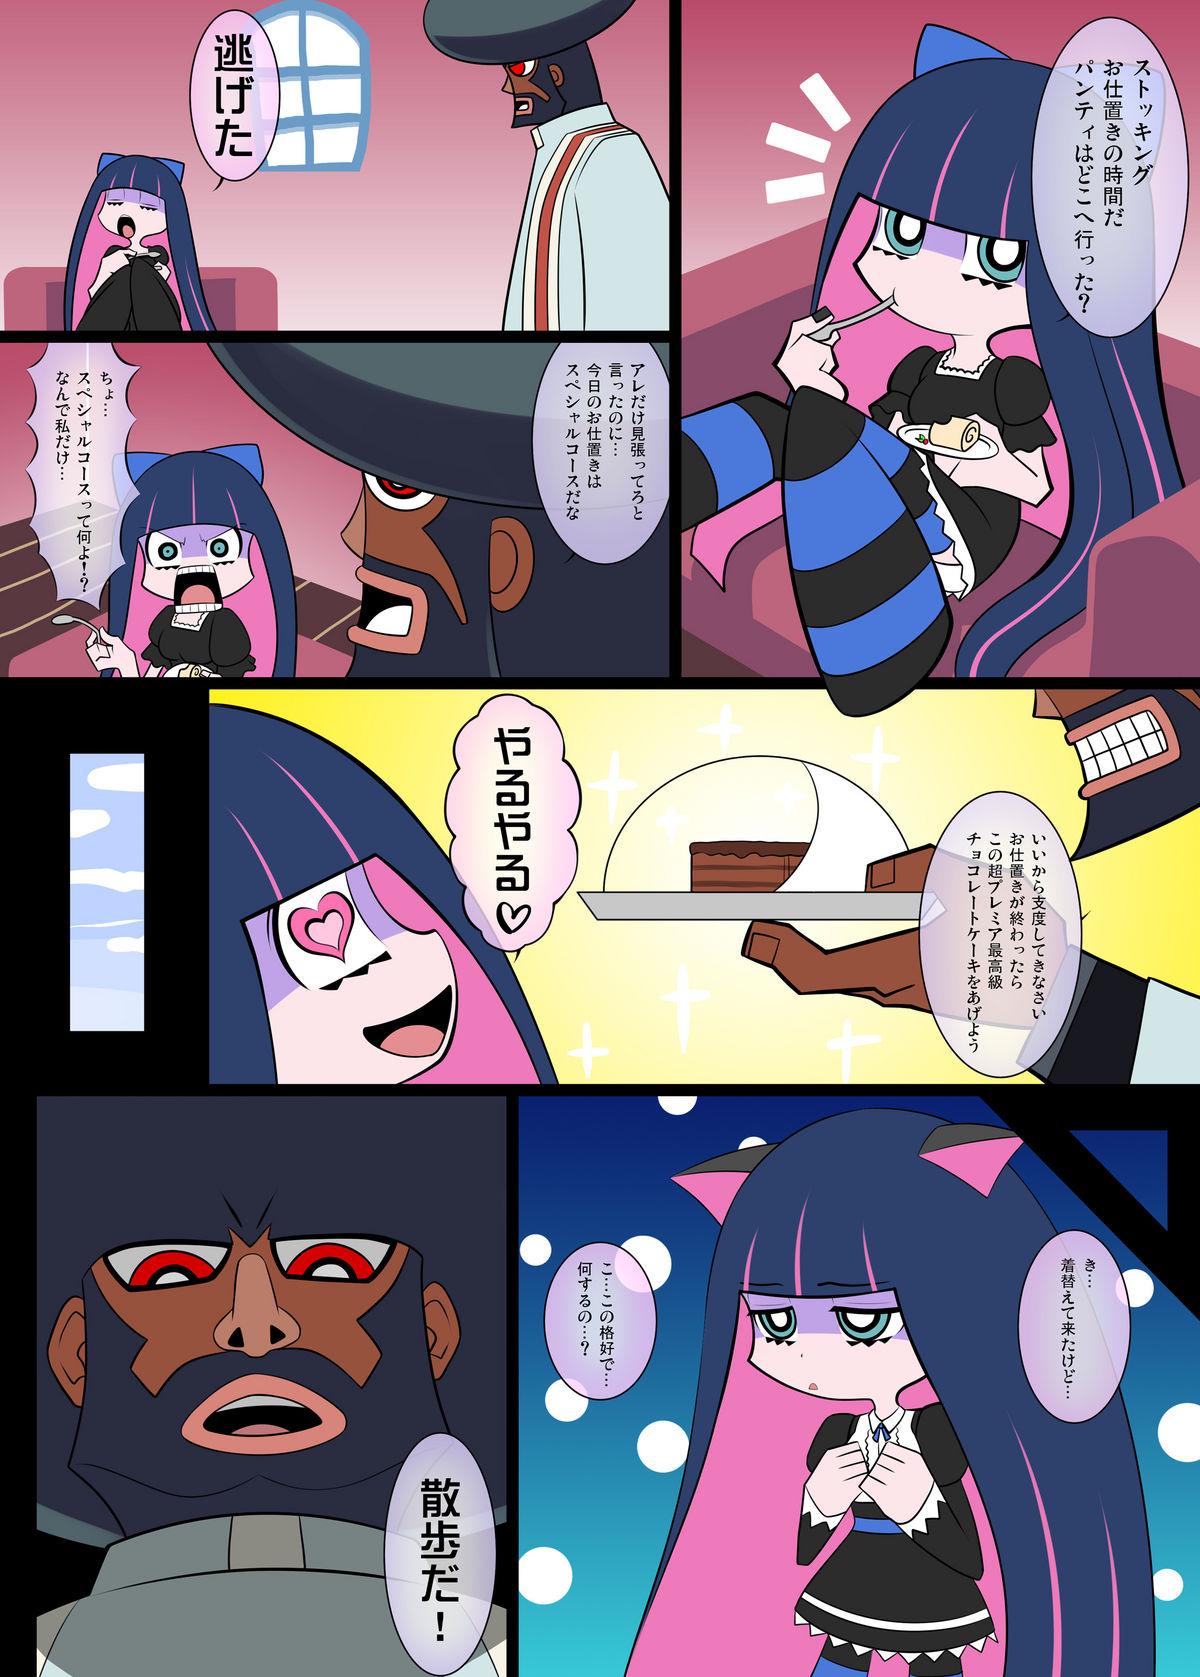 Blowjob Porn Sperma & Sweets with Villager - Panty and stocking with garterbelt Amateur - Page 3